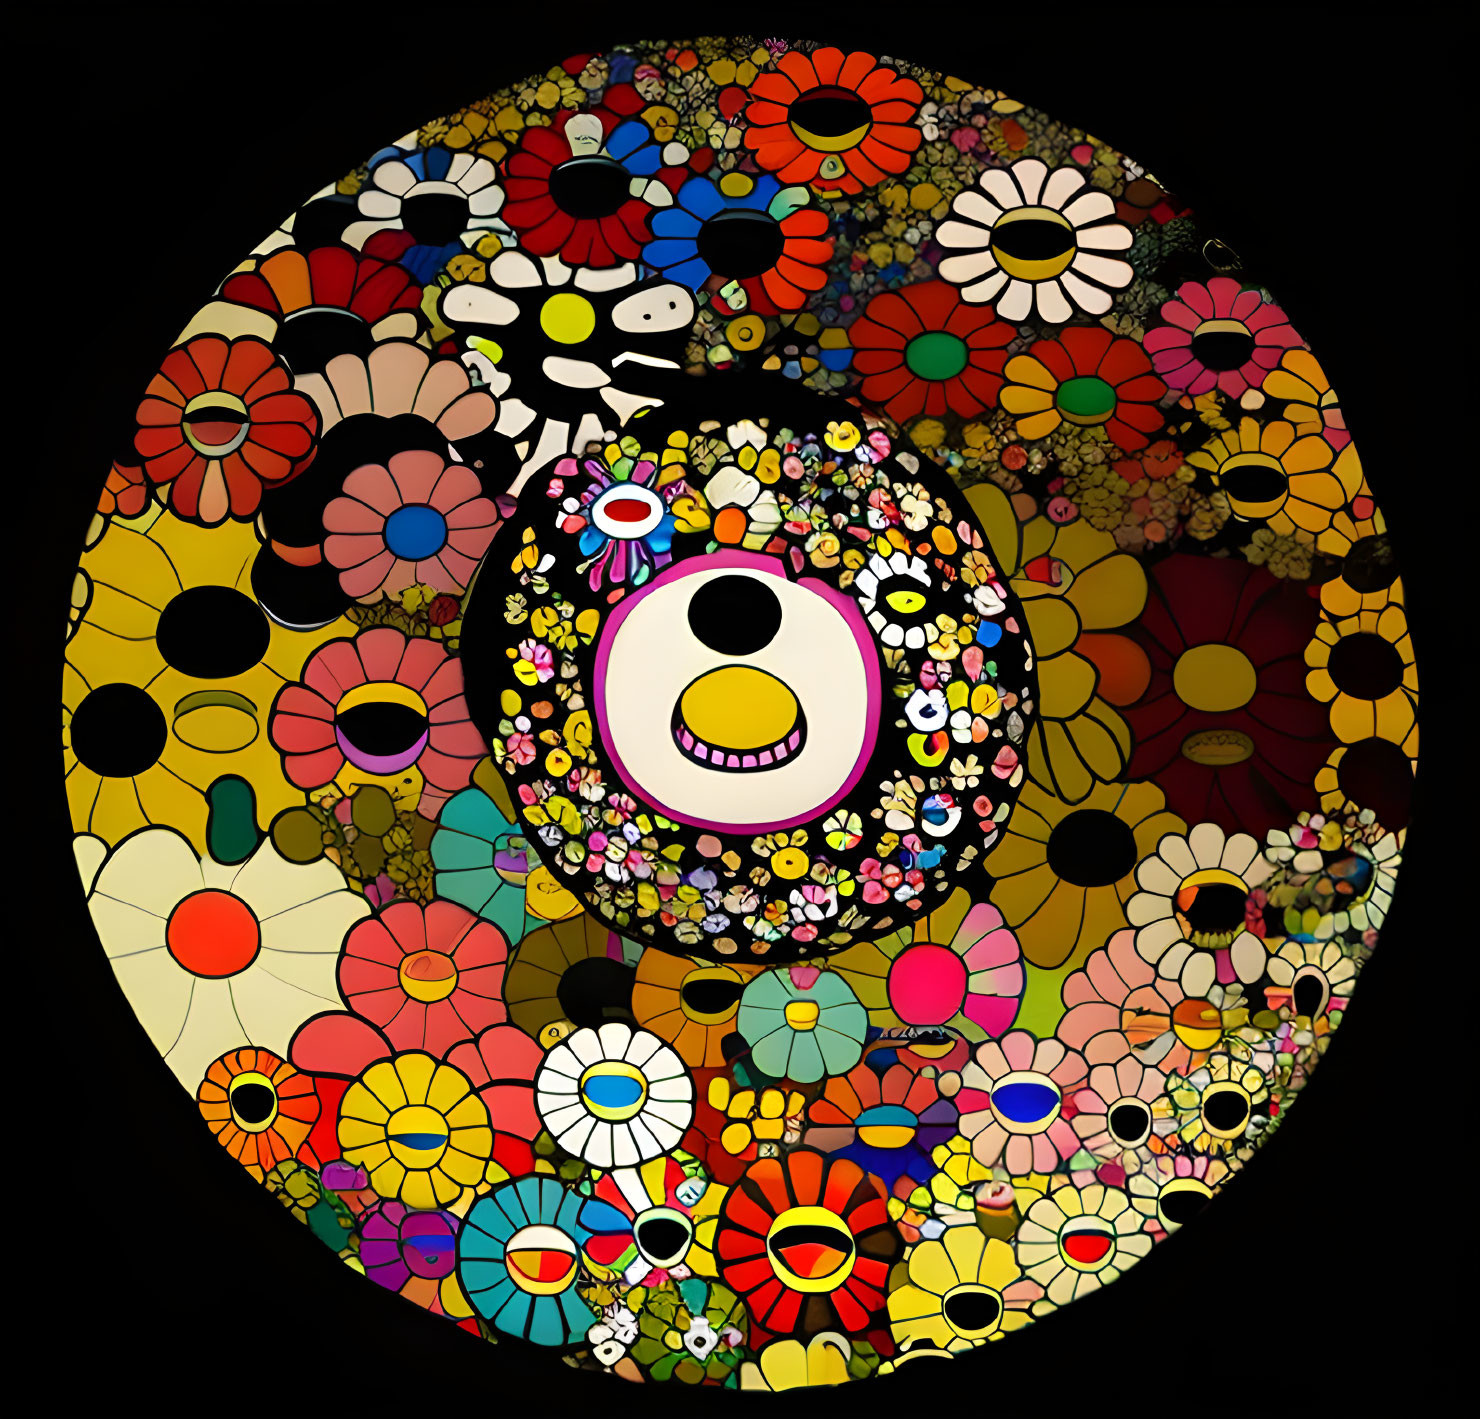 Colorful Flower Mosaic on Black Background